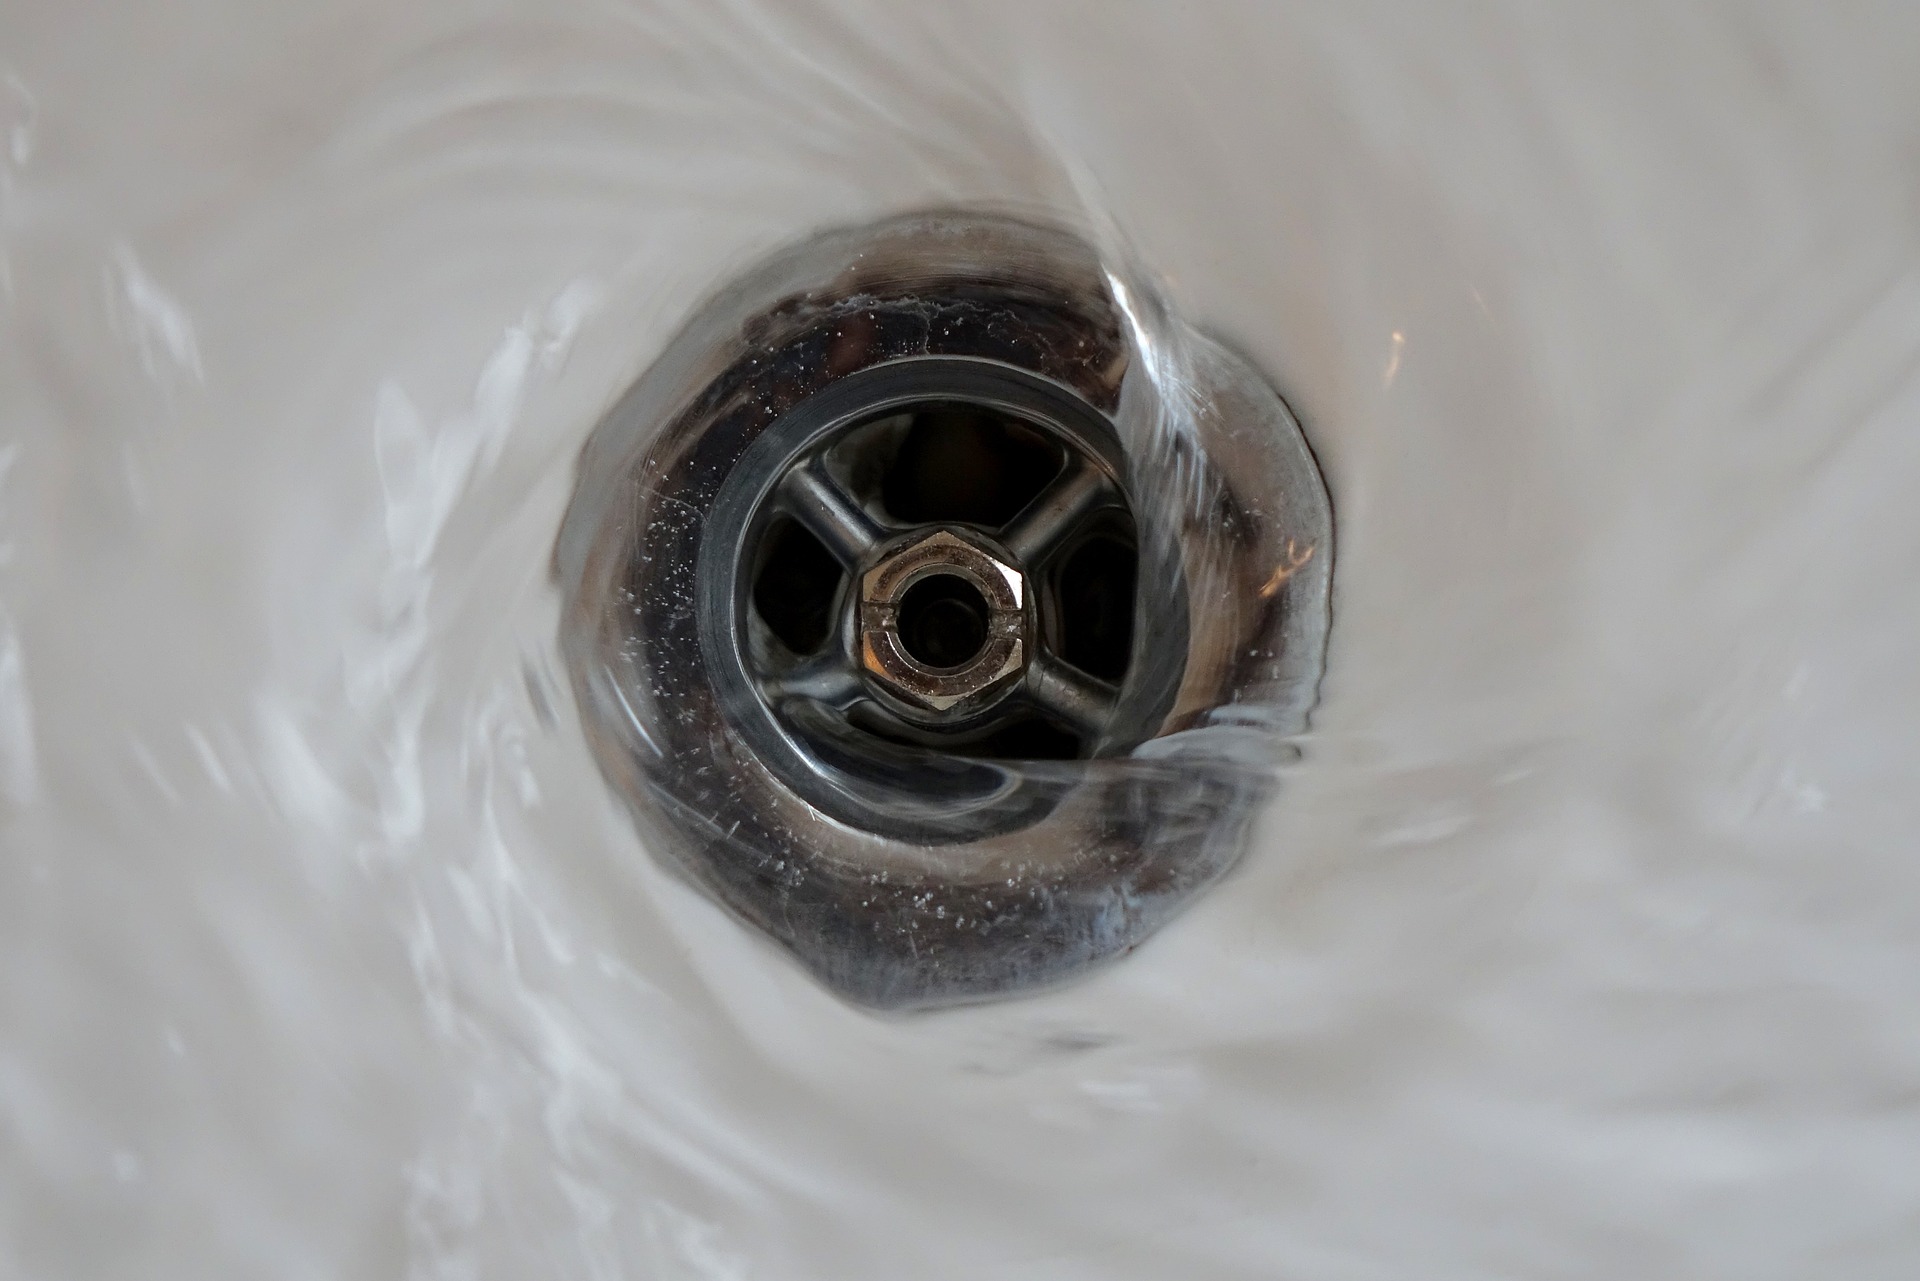 How to unclog a sink with baking soda and vinegar